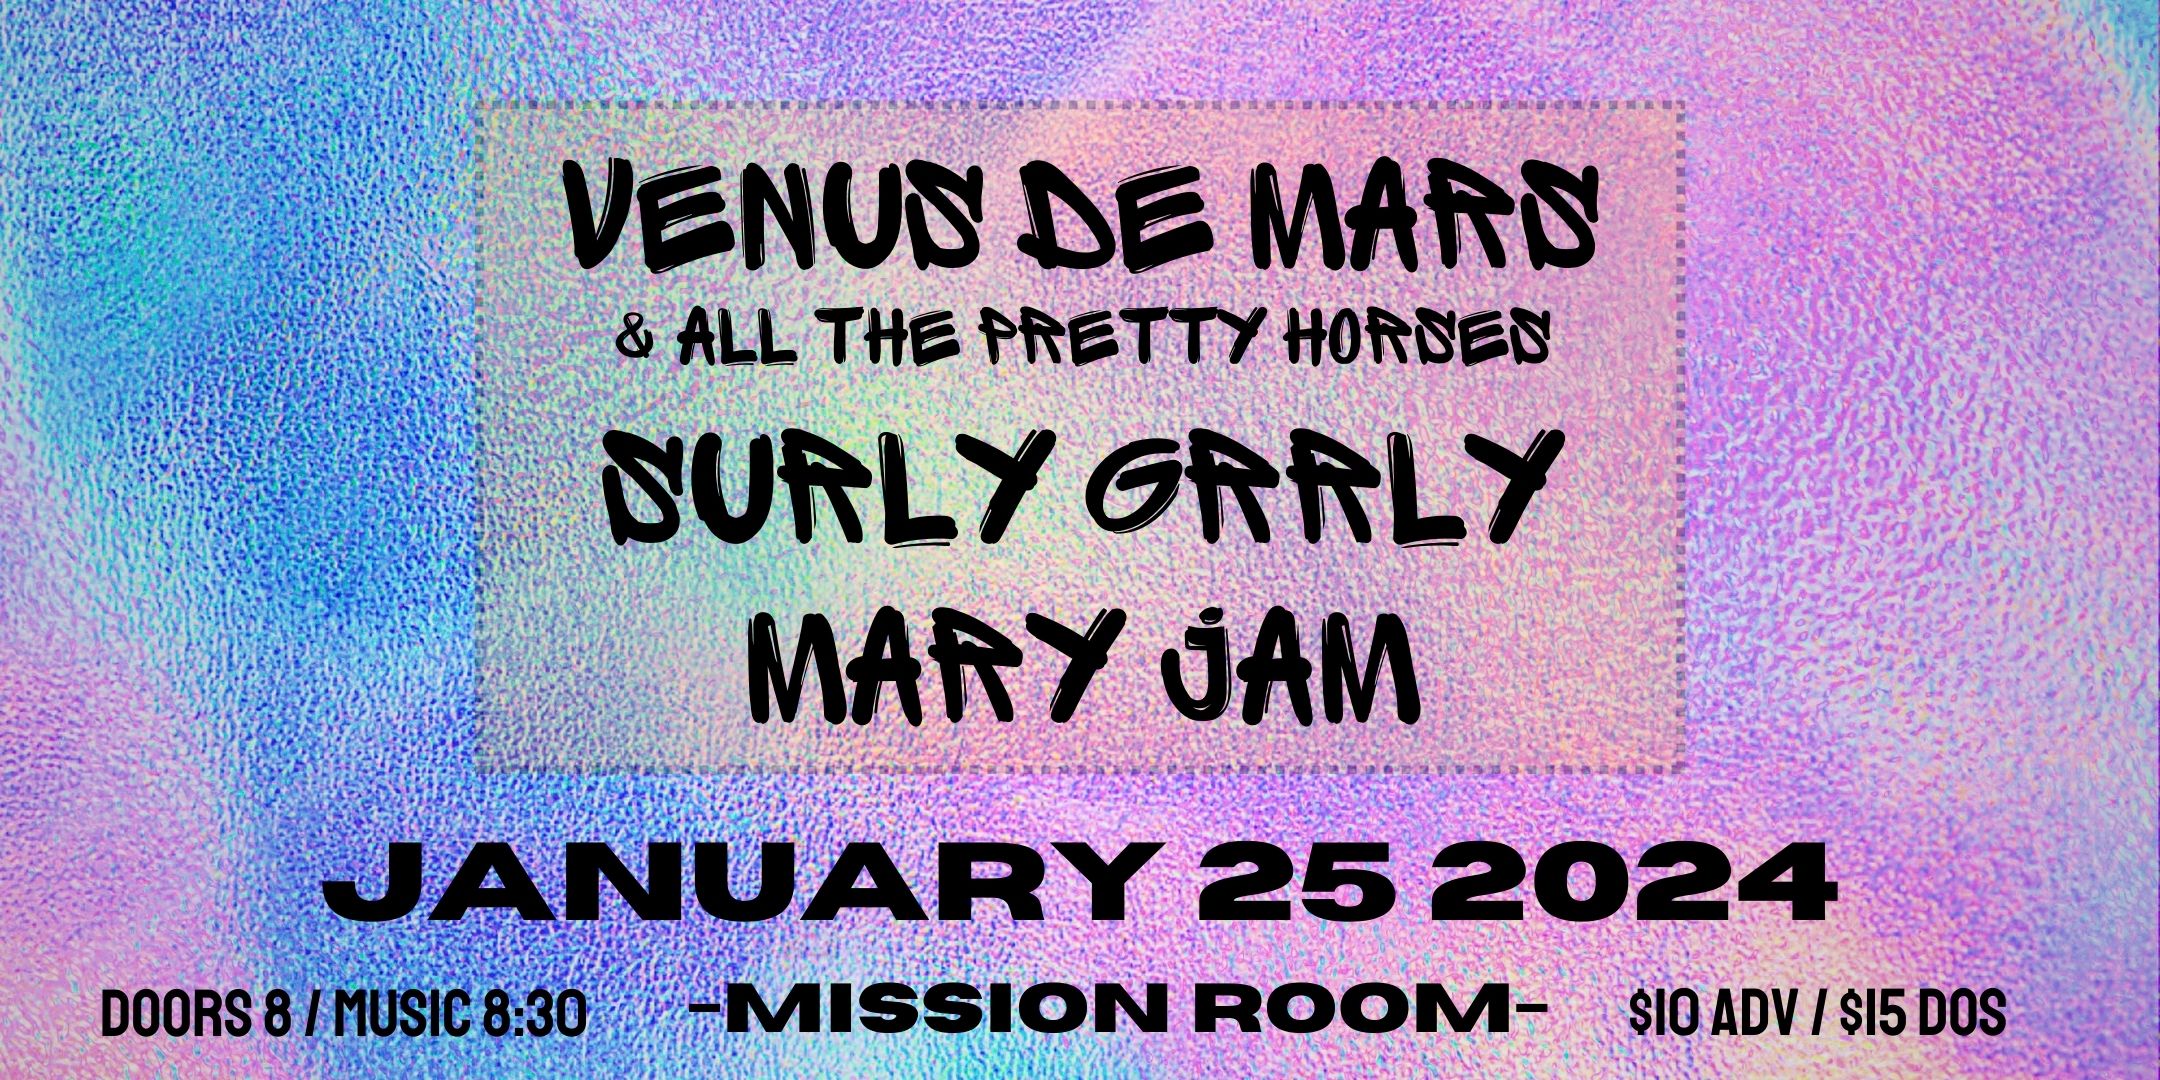 Venus DeMars & All The Pretty Horses Surly Grrly Mary Jam Thursday, January 25 Mission Room at The Hook and Ladder Doors 8:00pm :: Music 8:30pm :: 21+ General Admission :: $10 Advance / $15 Day of Show